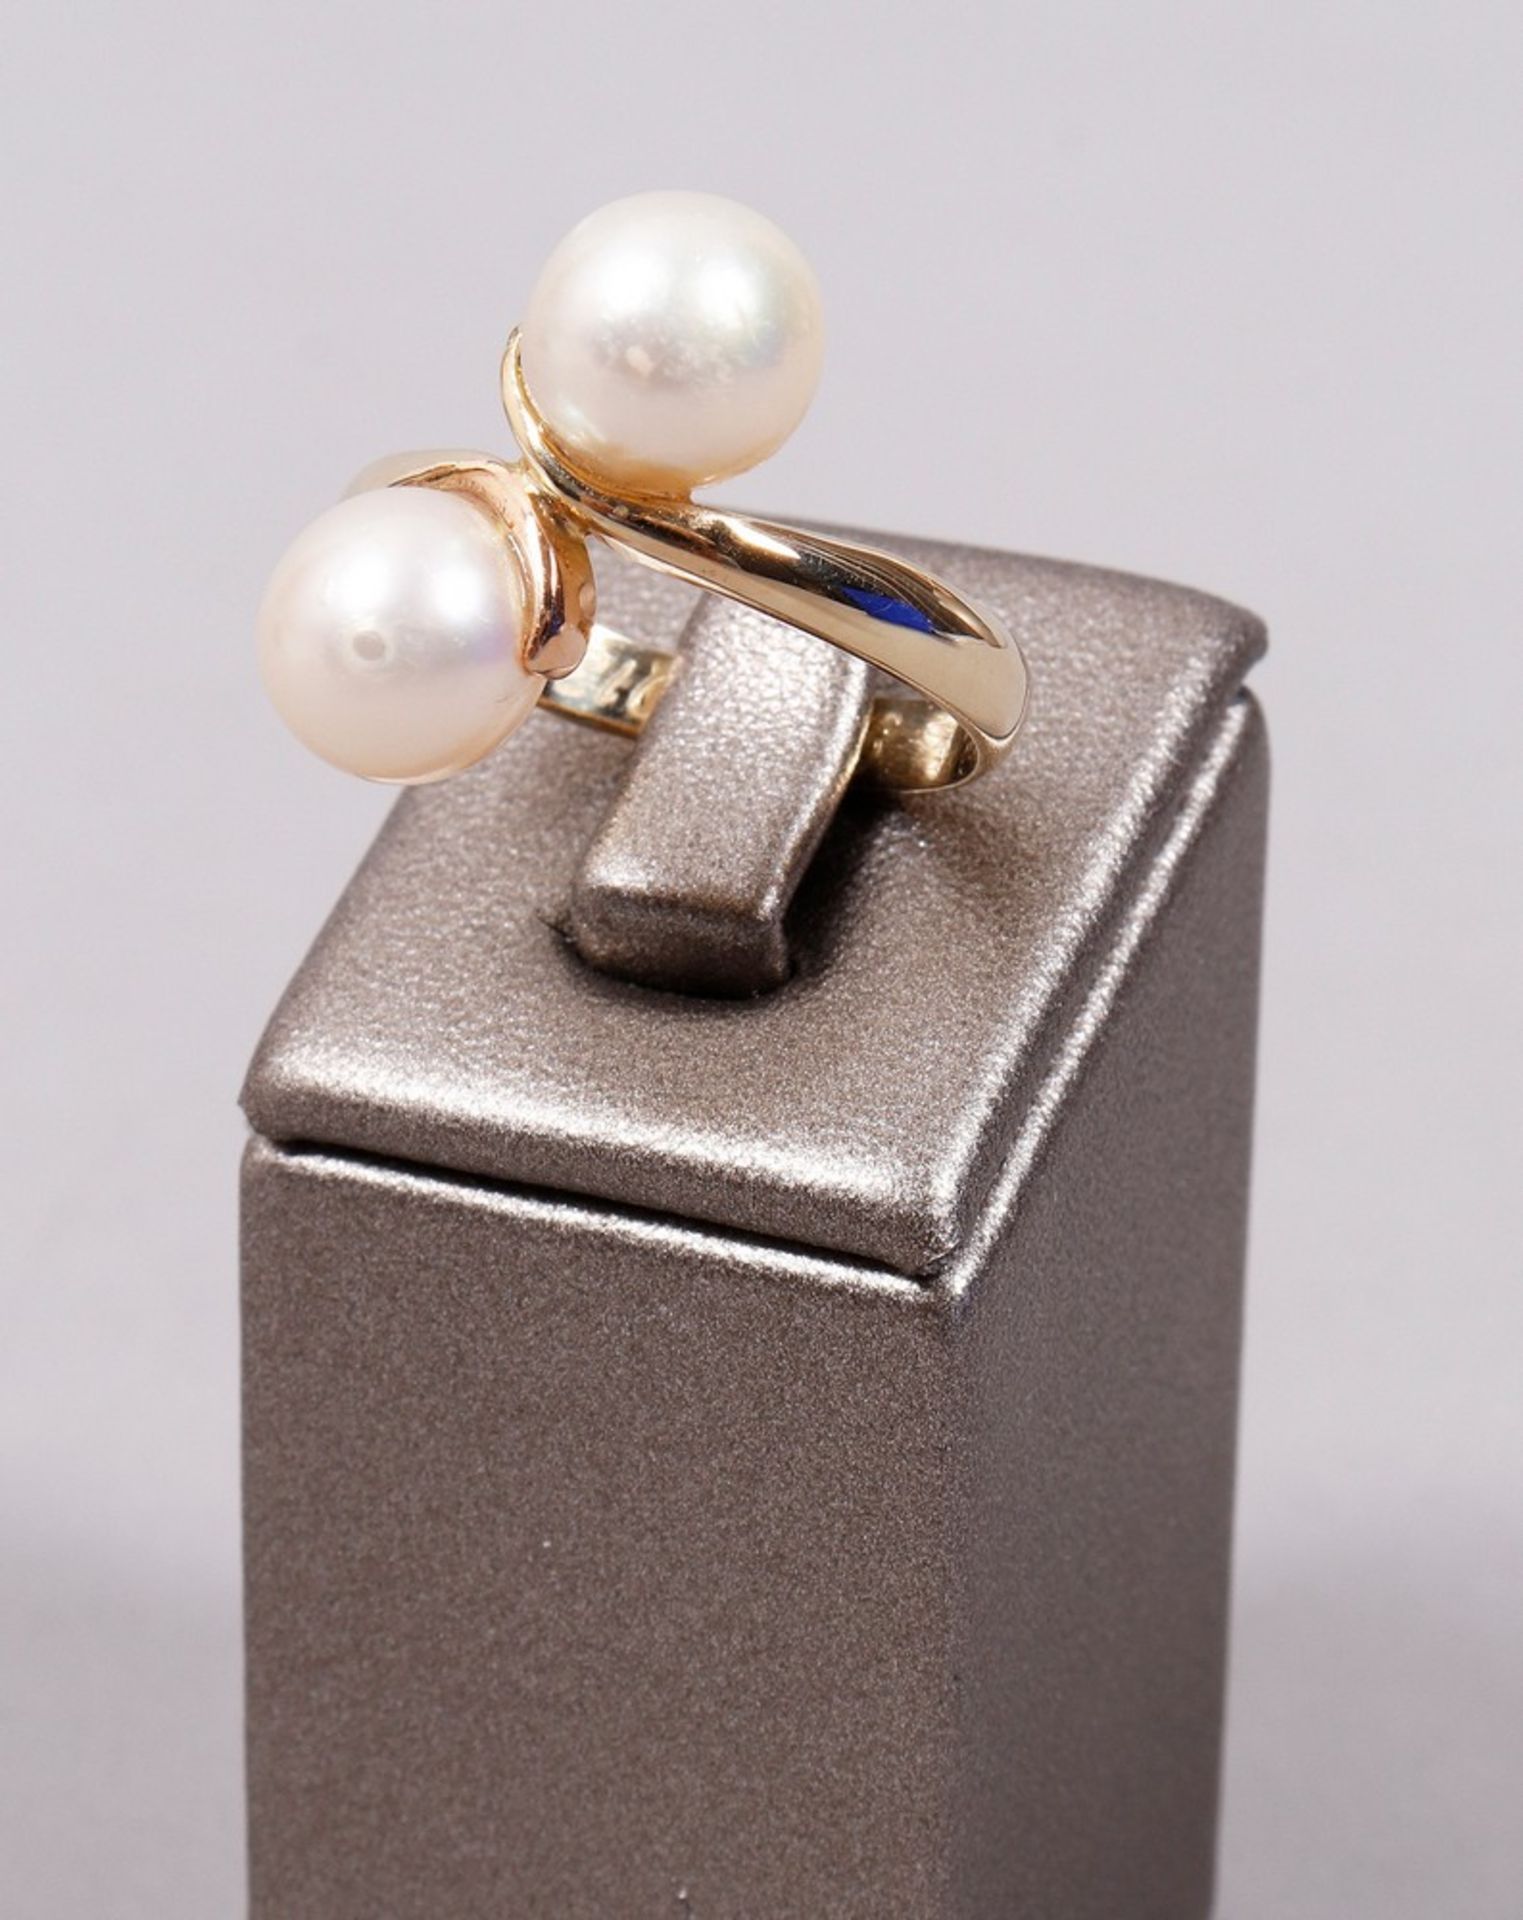 Pearl ring, 585 yellow gold, 20th C.